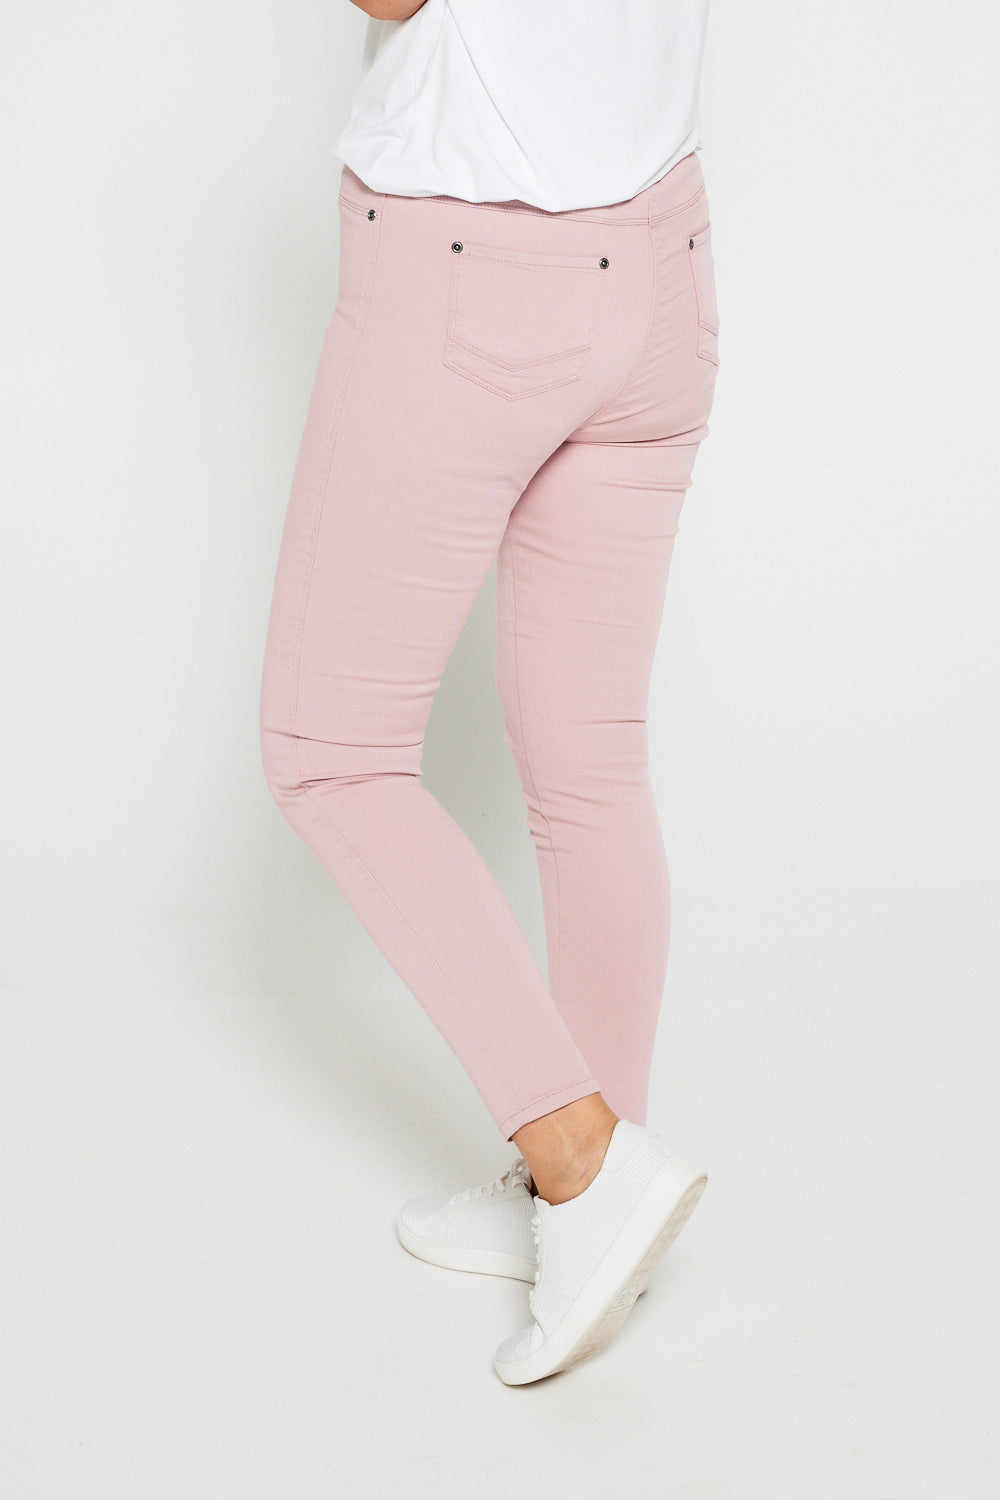 Denver Jeggings - Dusty Pink  Cafe Latte Ankle Length Pull On Jeggings –  TULIO Fashion